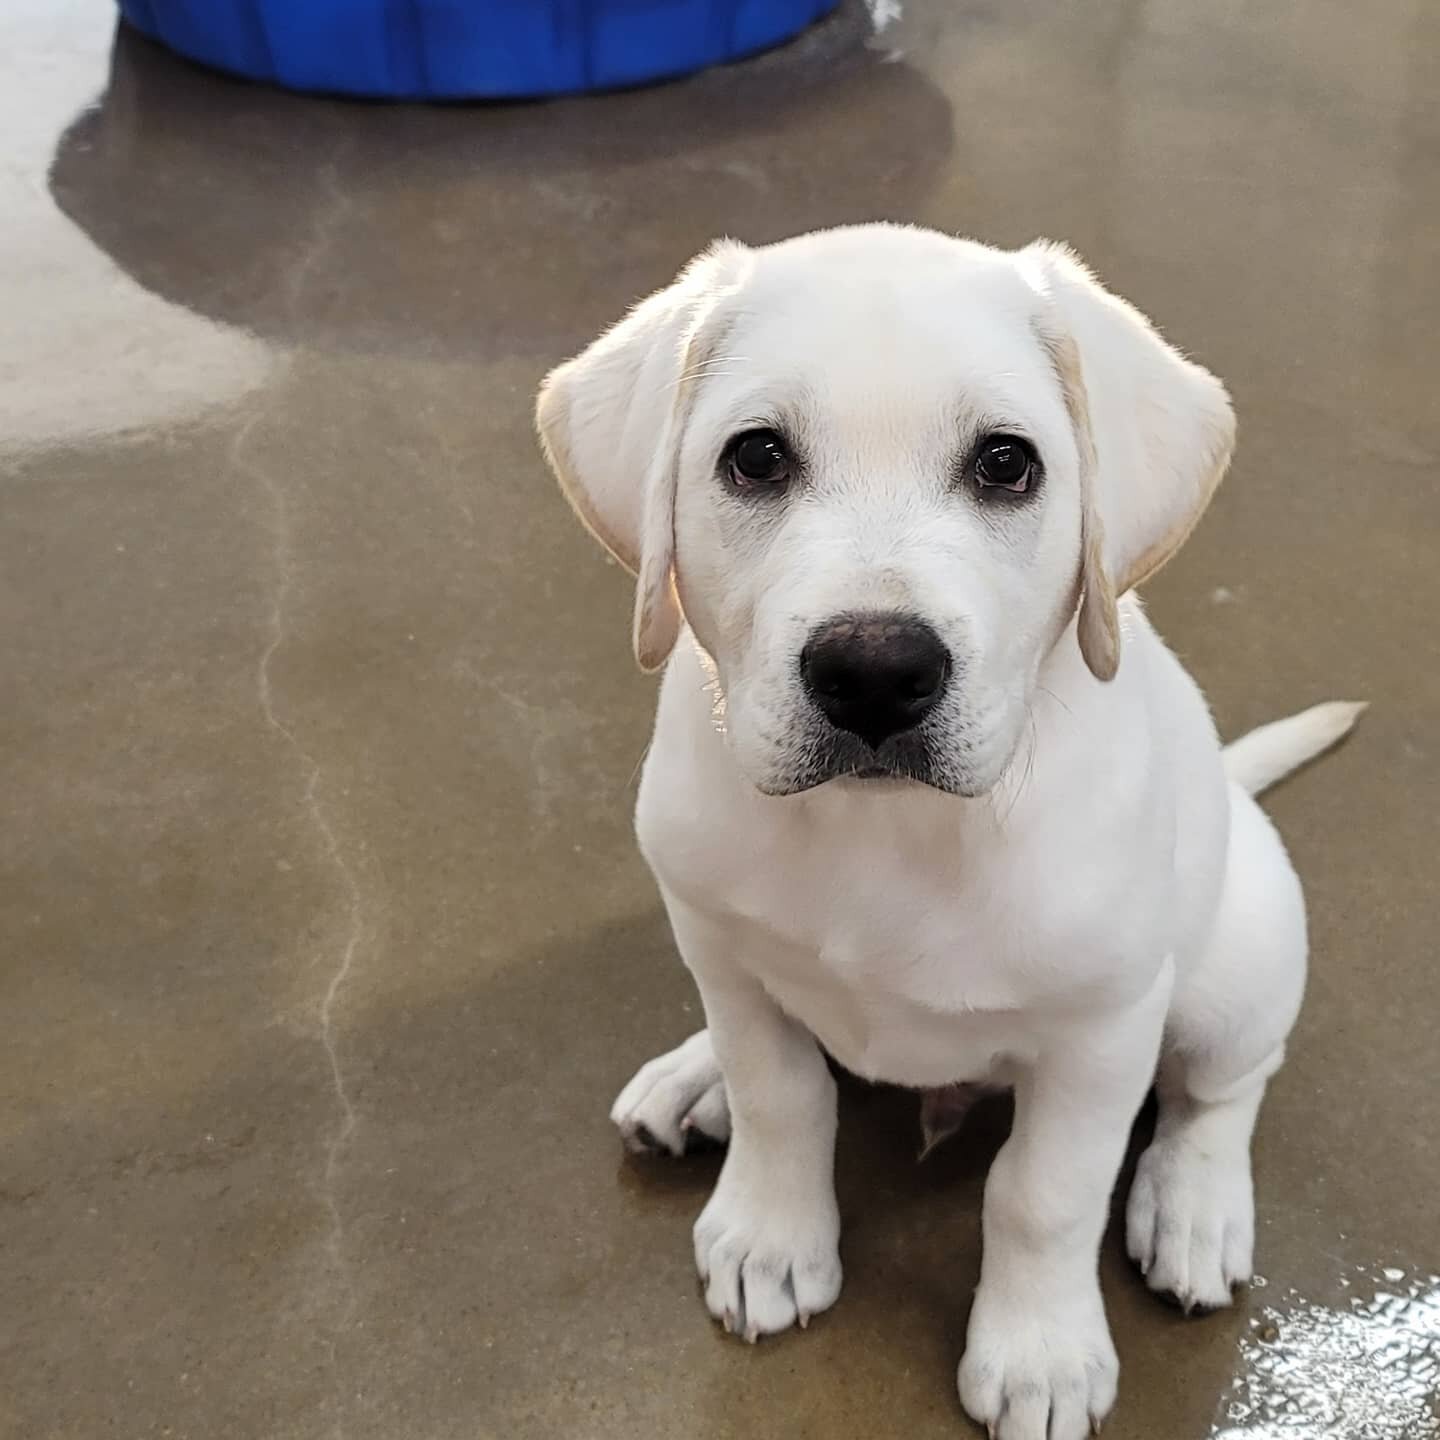 Soooo this little gem of a pup goes by the name Ruger. He is one of our regulars and is such a joy to have every week. He is about 4 months old and is a white lab. He is growing like crazy!!! His parents say they love bringing him because daycare wea